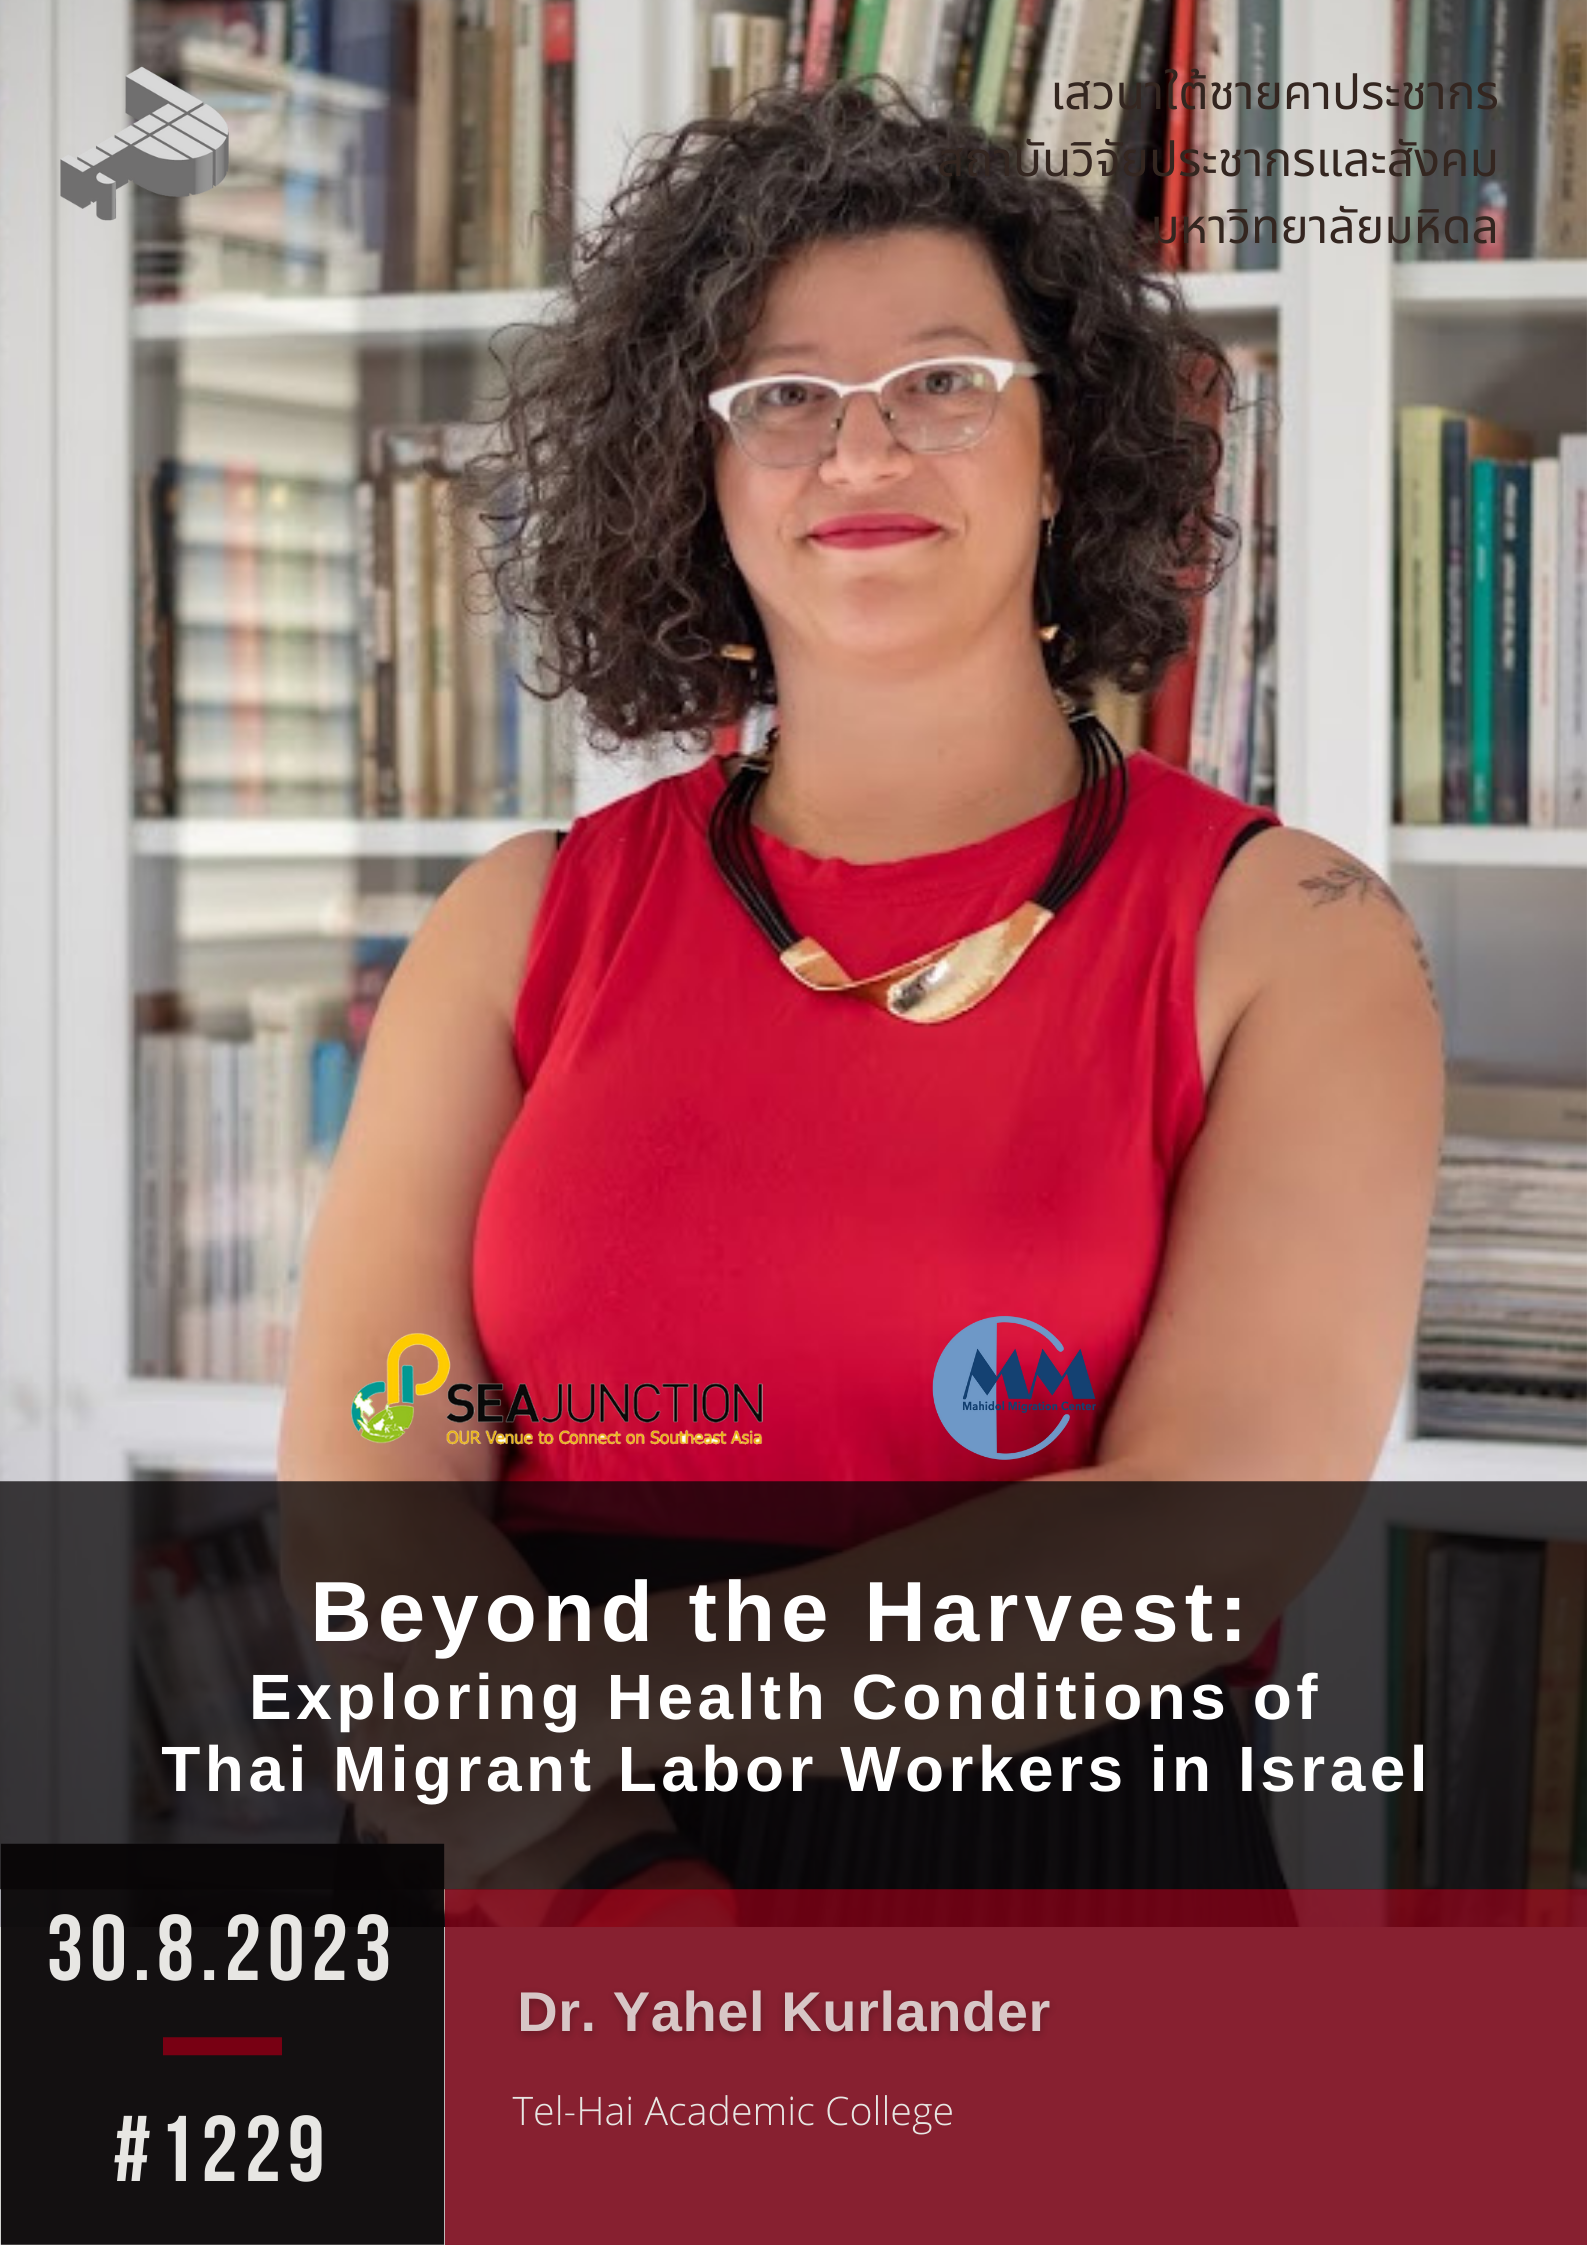 Beyond the Harvest: Exploring Health Conditions of Thai Migrant Labor Workers in Israel